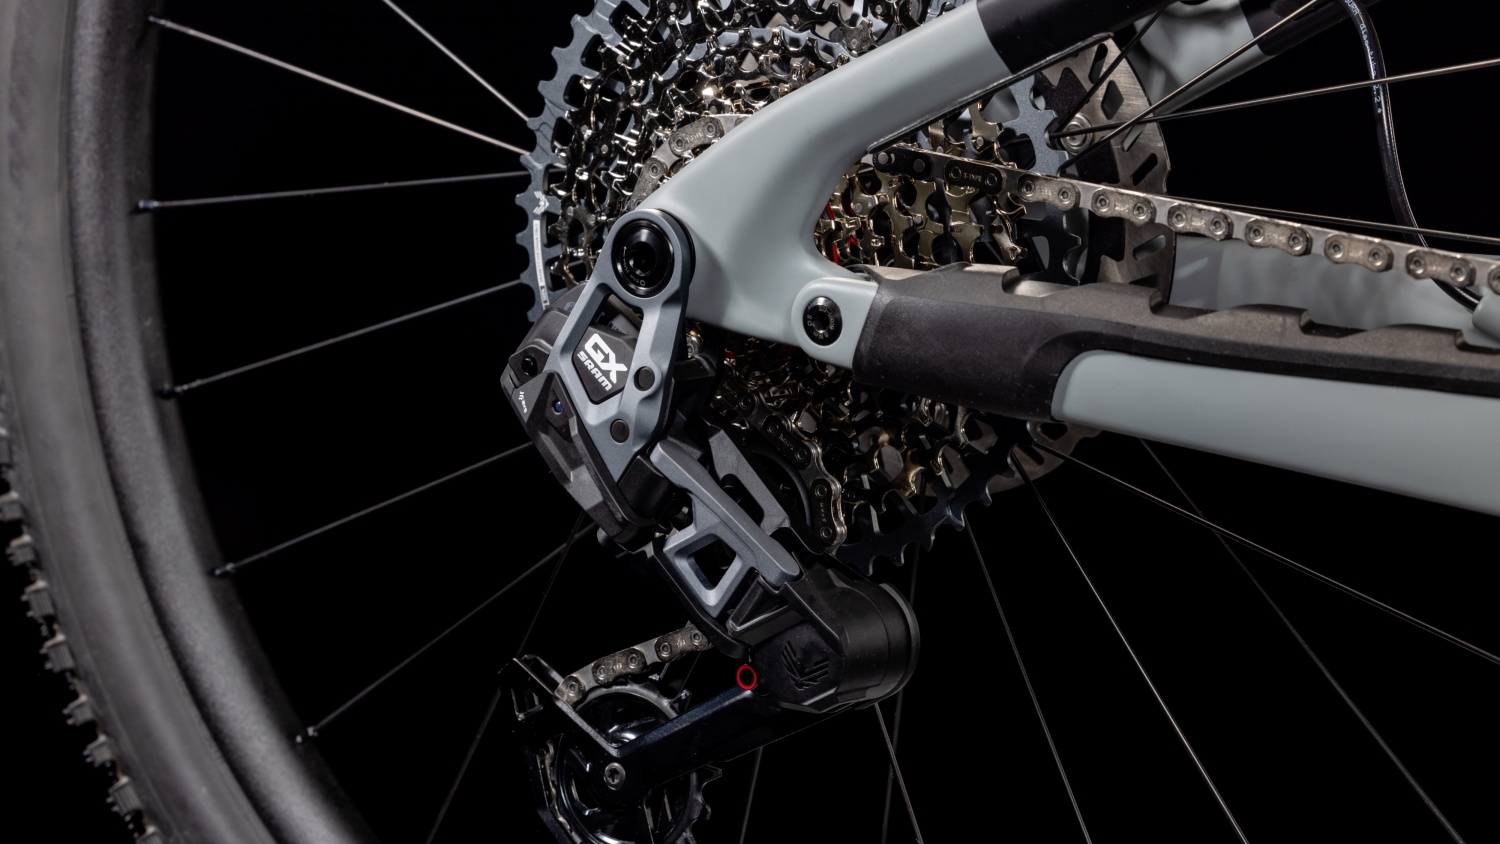 Two of the models come with SRAM AXS Transmission wireless shifting.